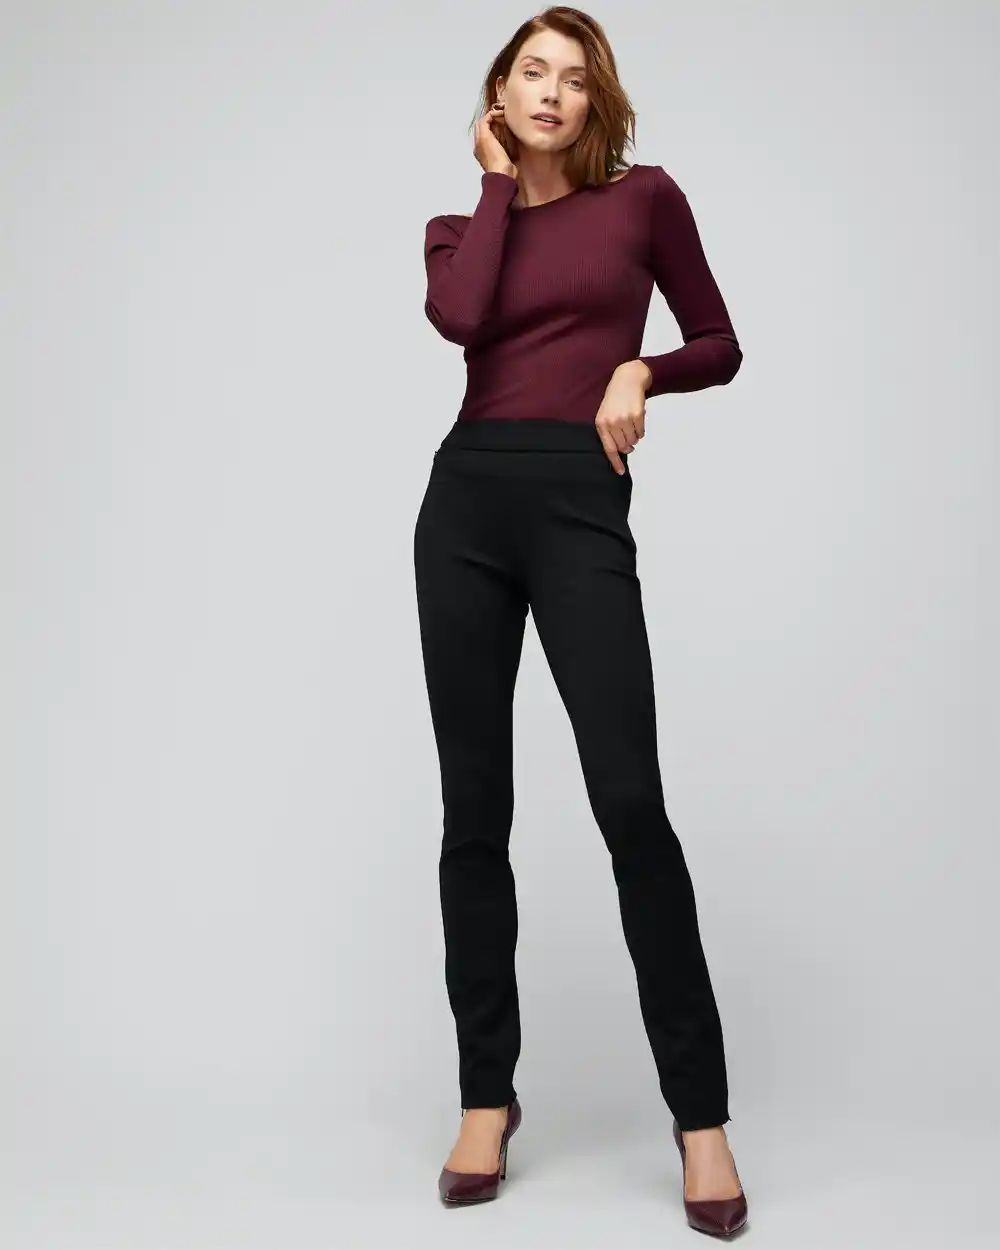 Luxe Stretch Skinny Pant | White House Black Market